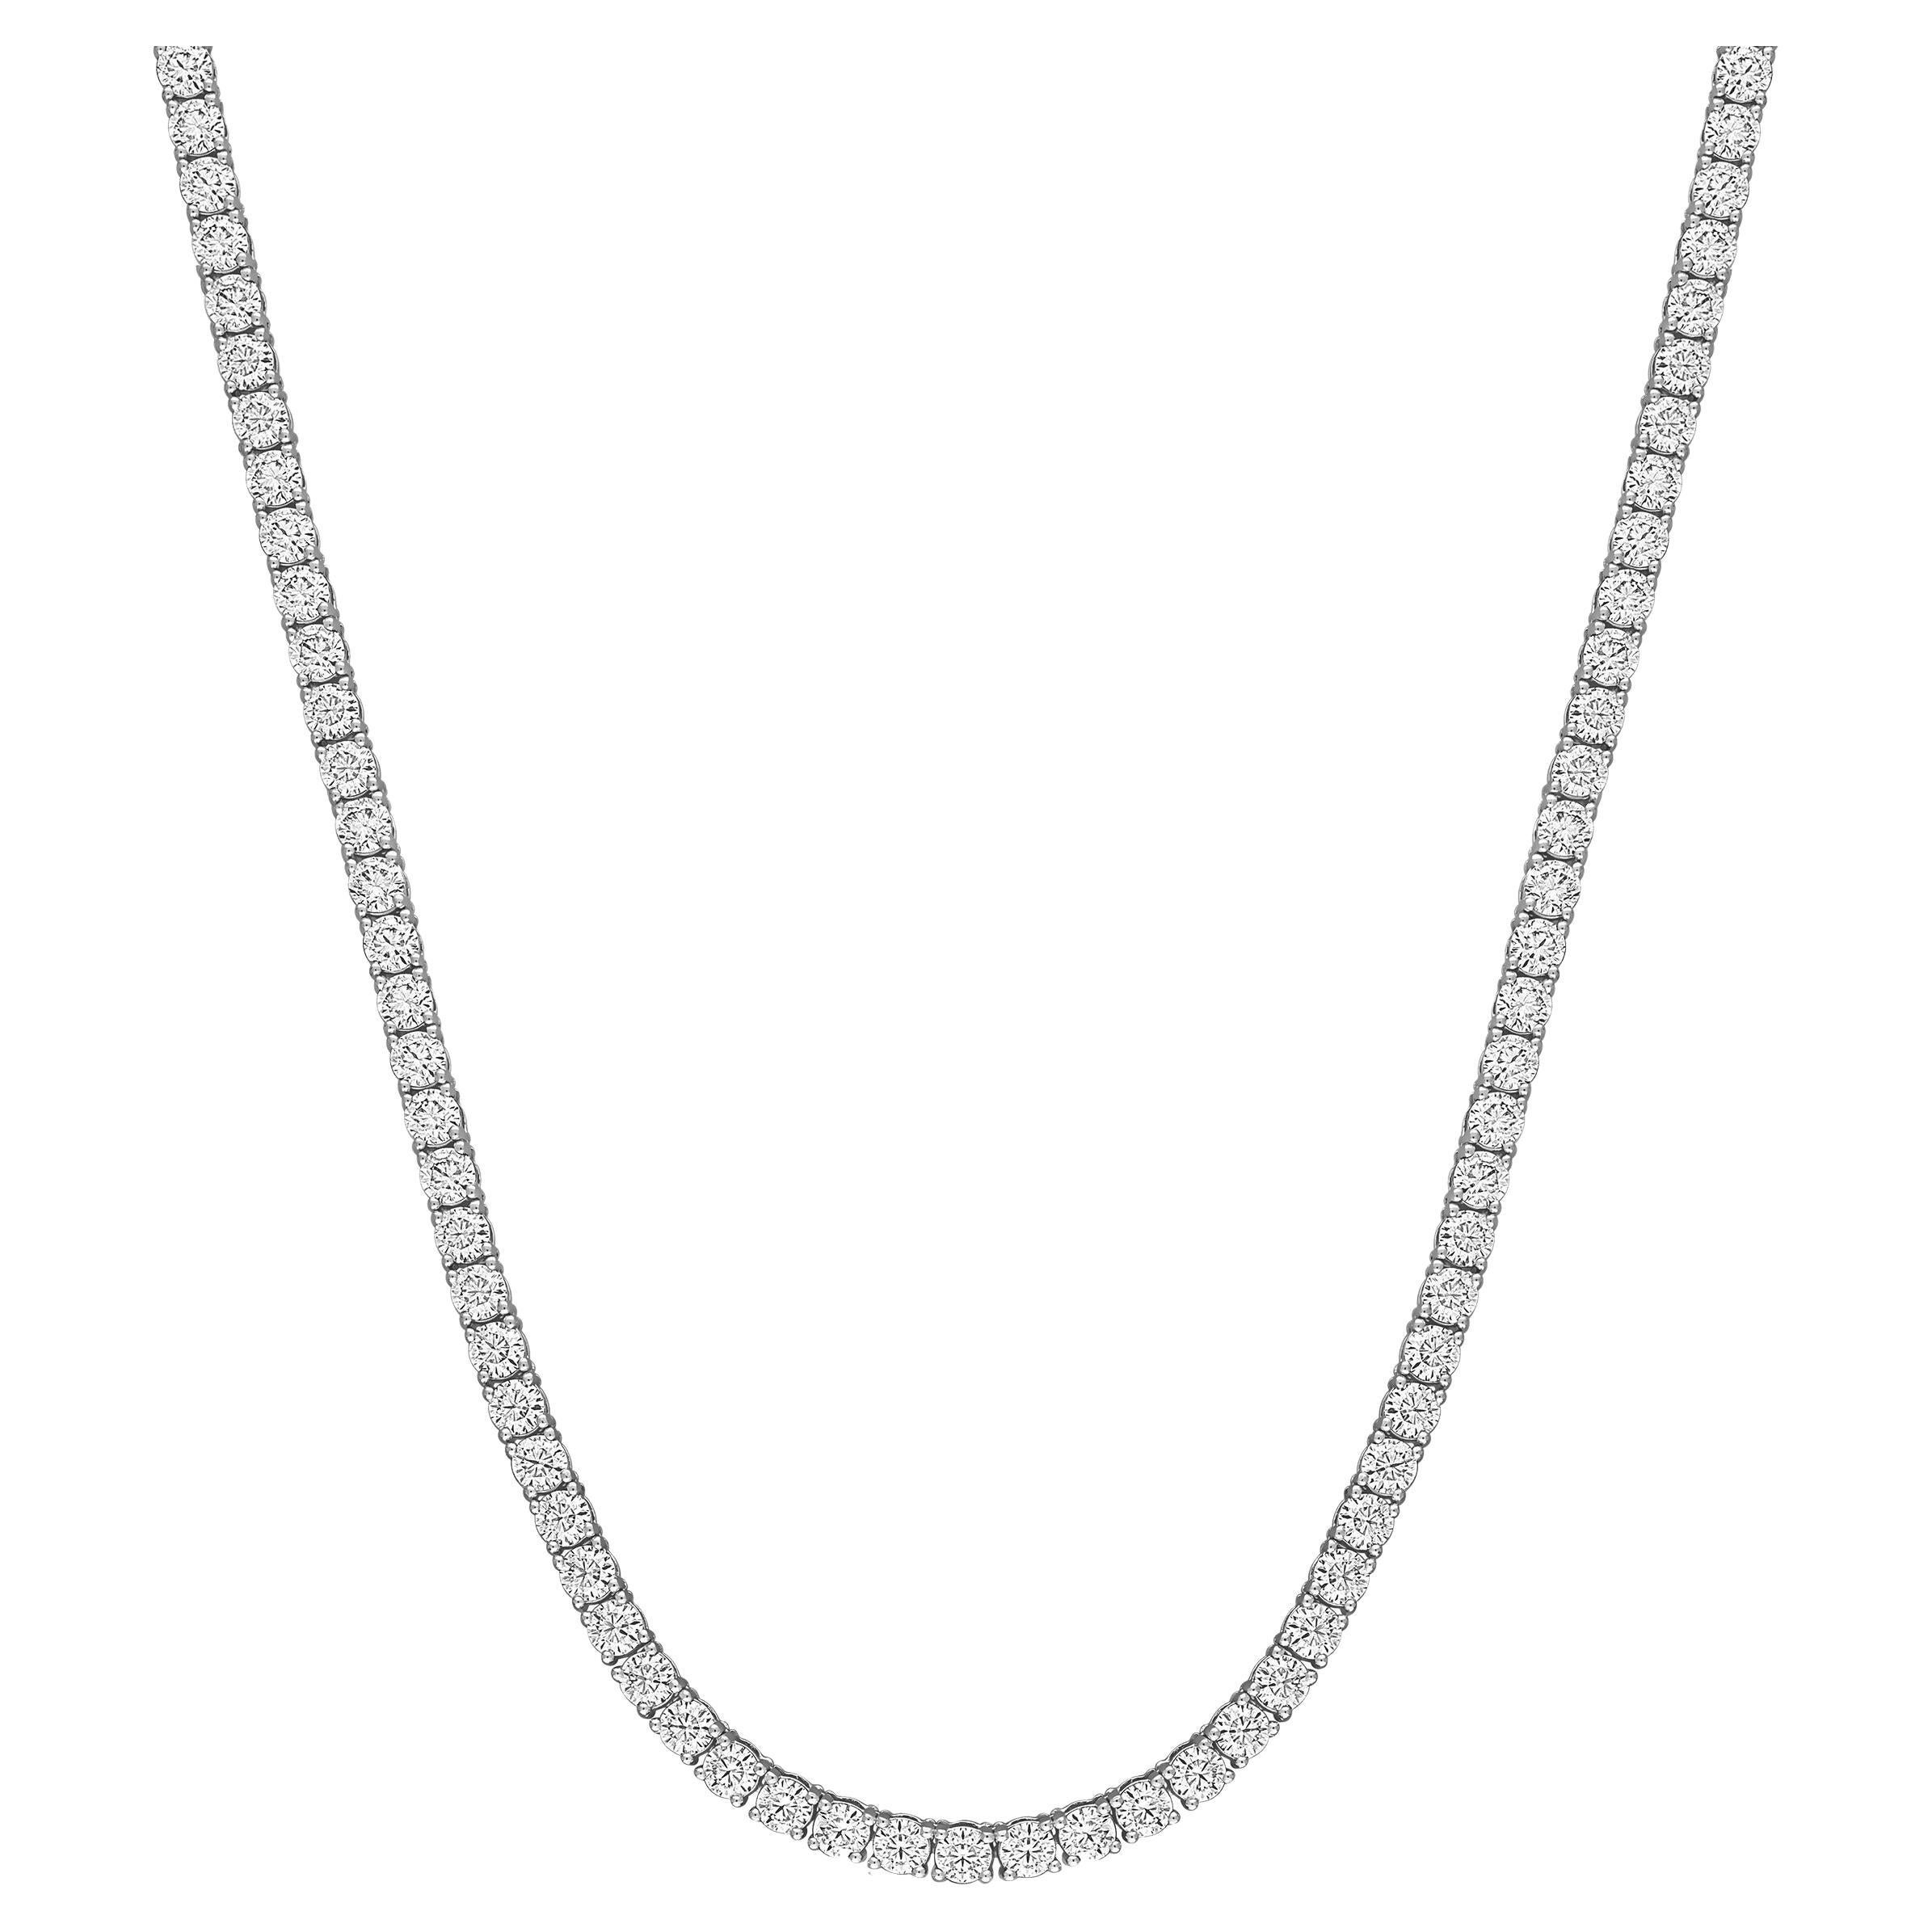 20.10 Carat Diamond Tennis Necklace in 14K White Gold For Sale